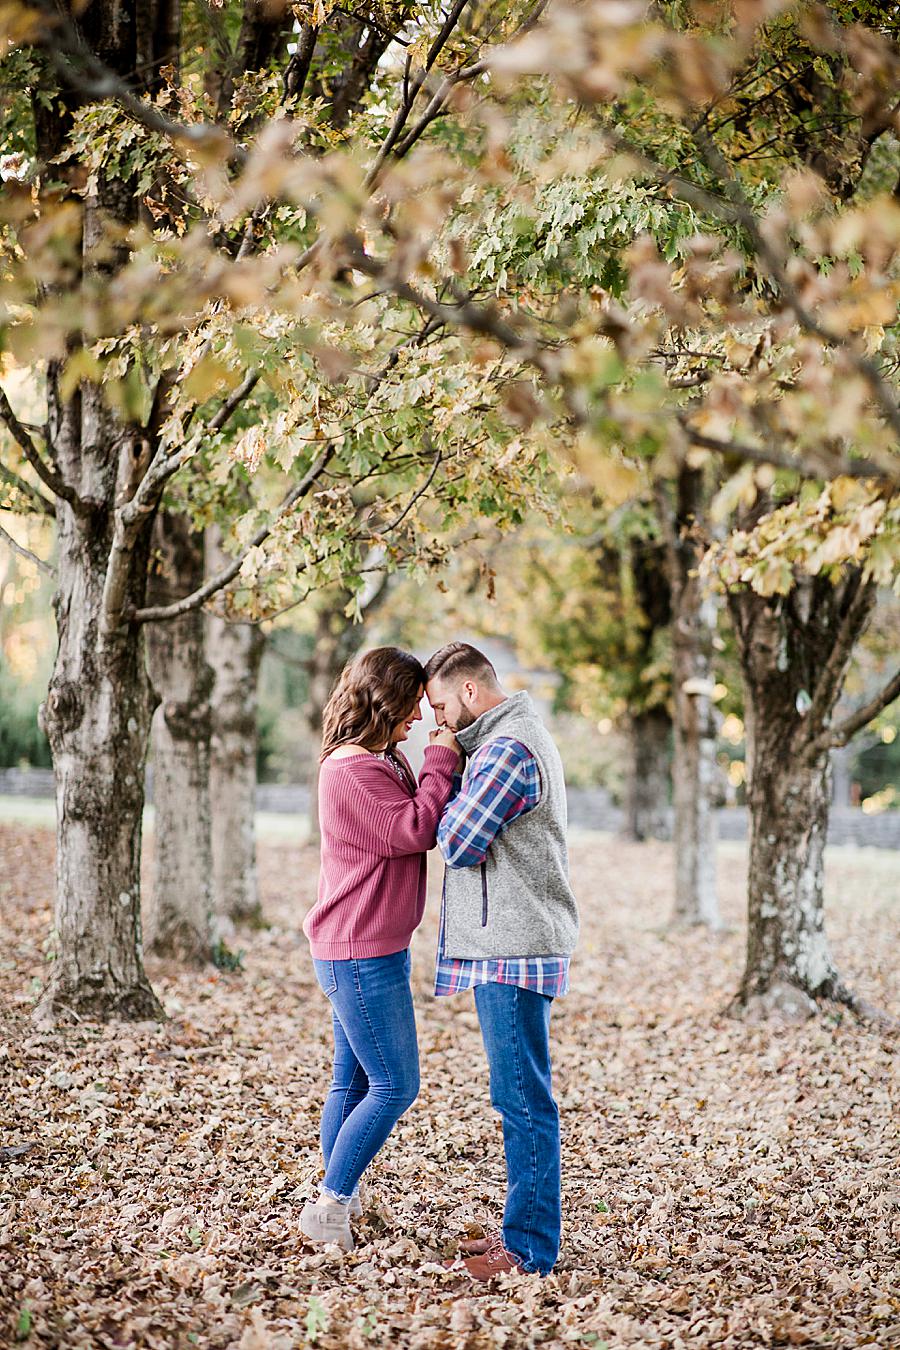 Kiss on the hand by Knoxville Wedding Photographer, Amanda May Photos.